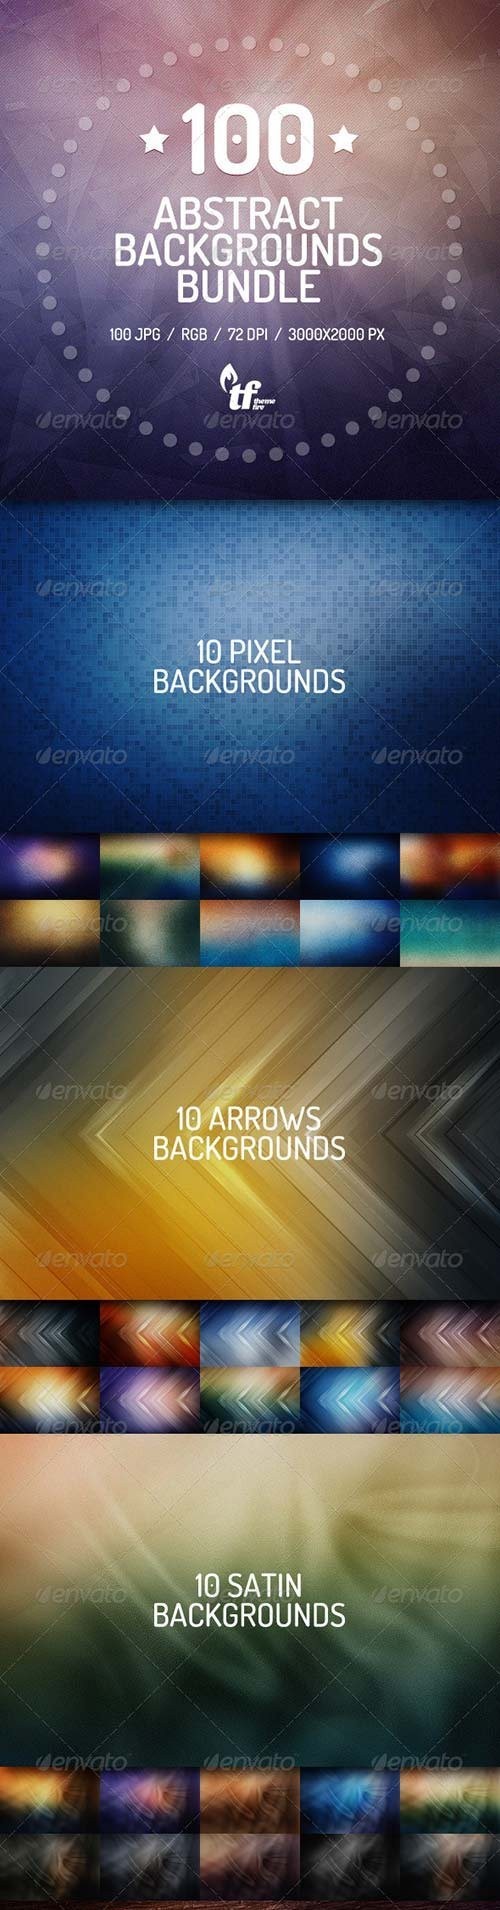 GR-100 abstract backgrounds bundle 7577567